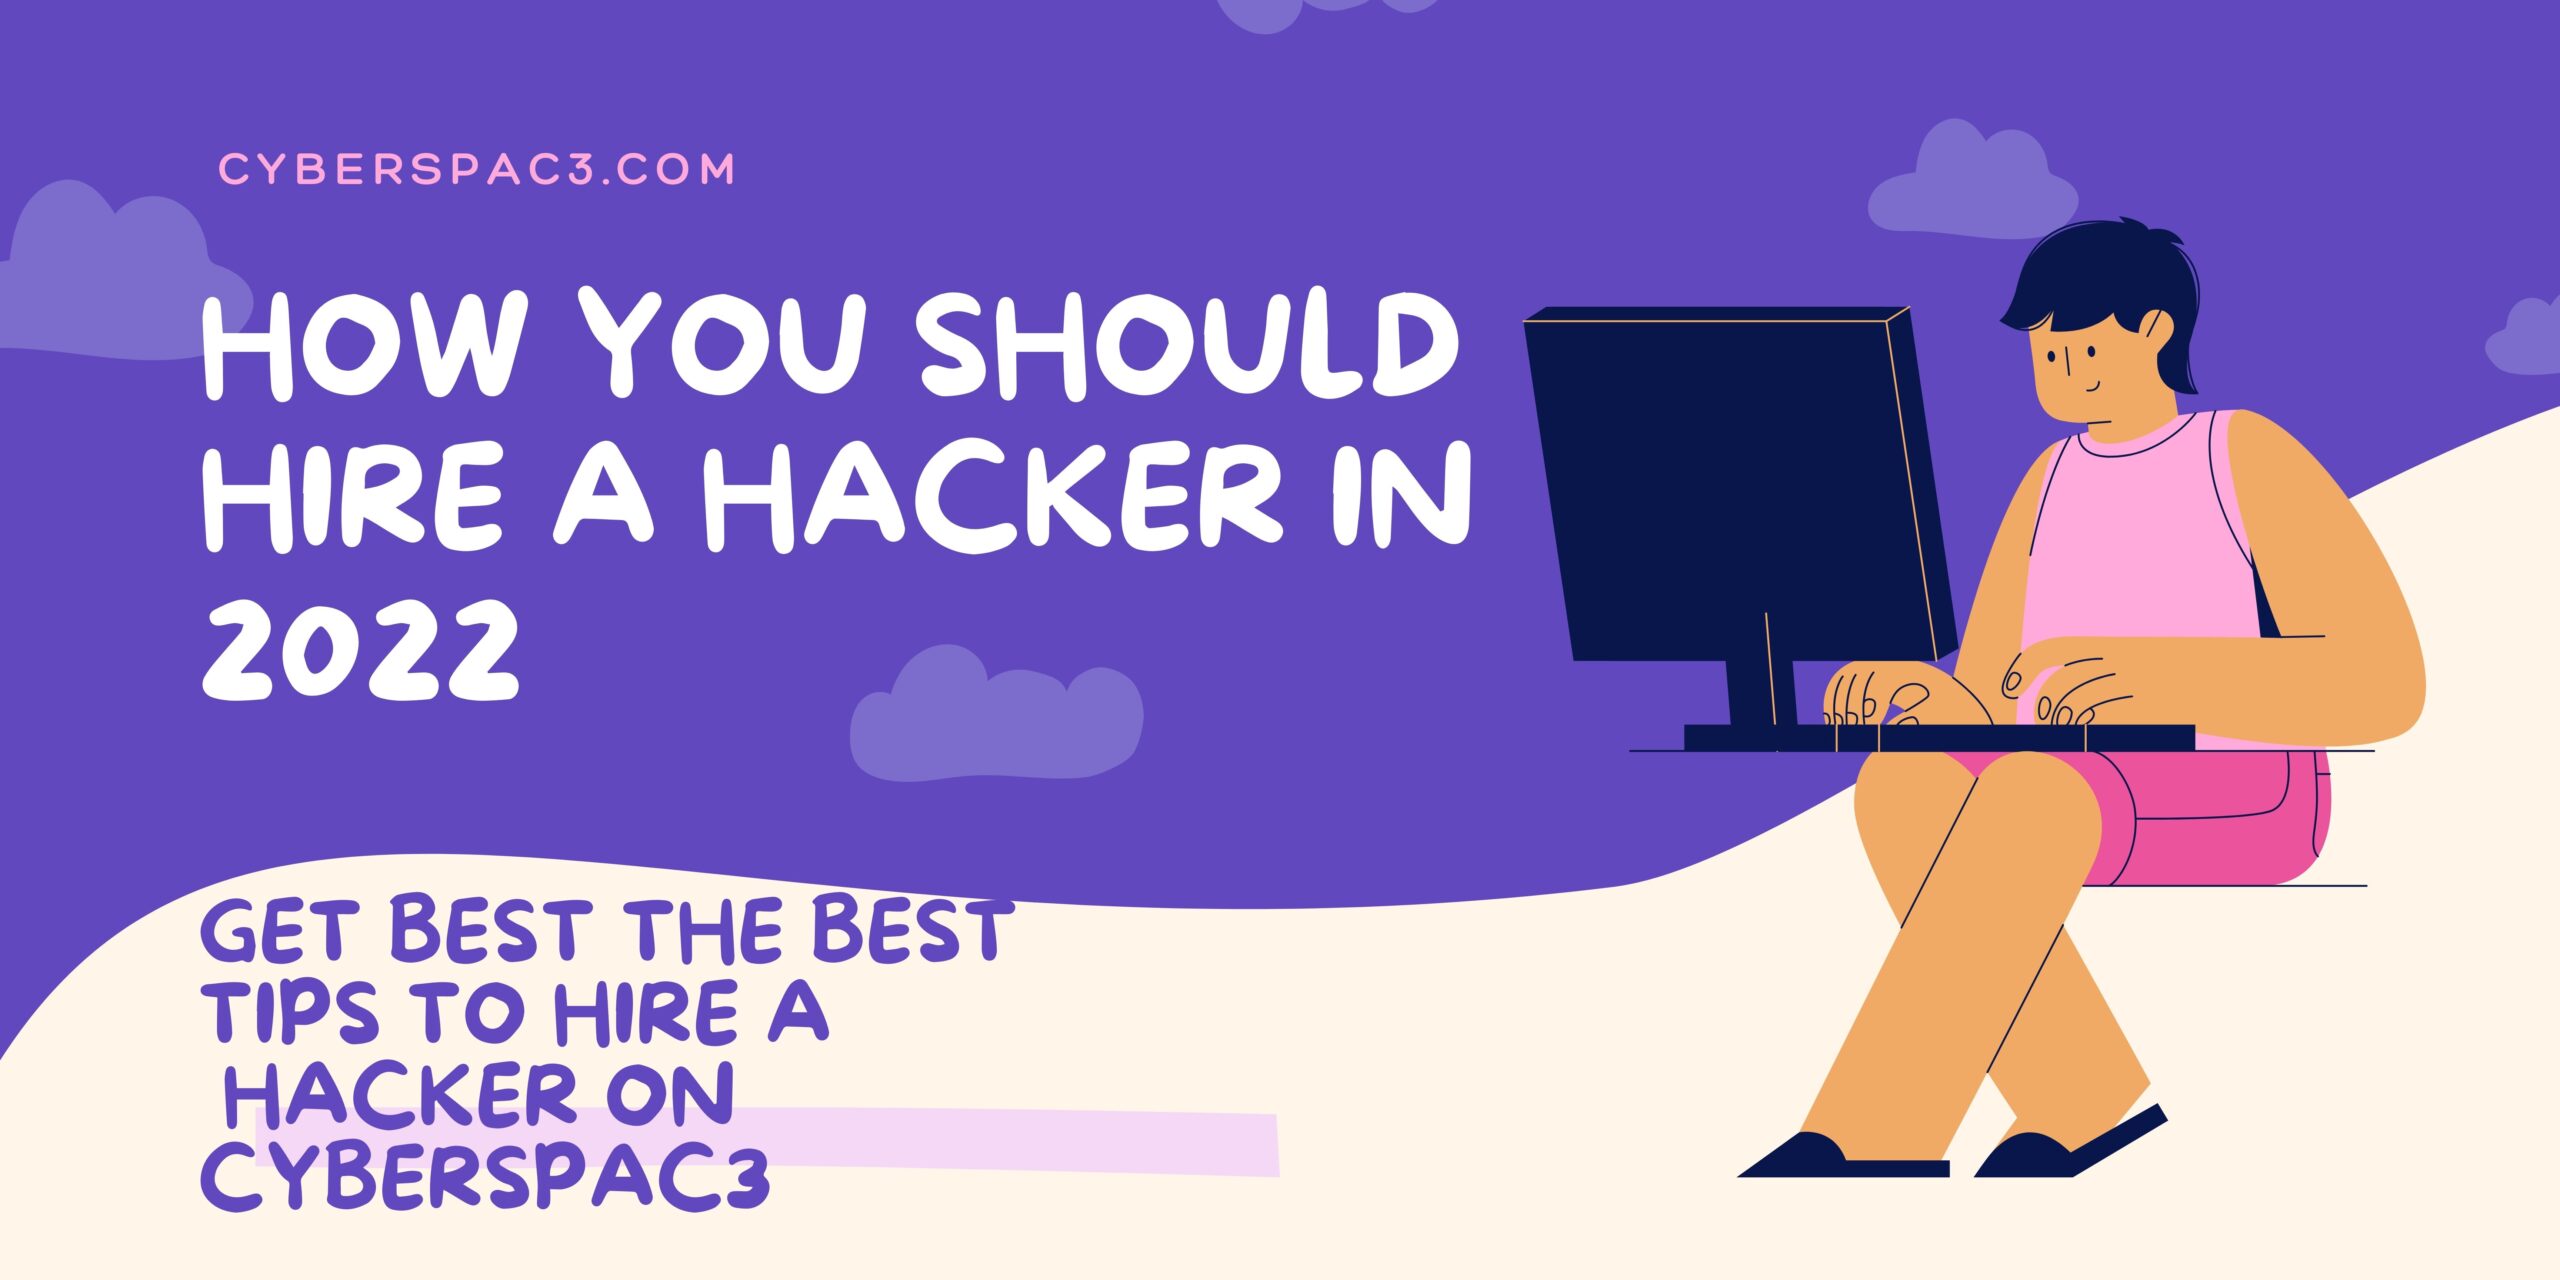 How to hire a hacker